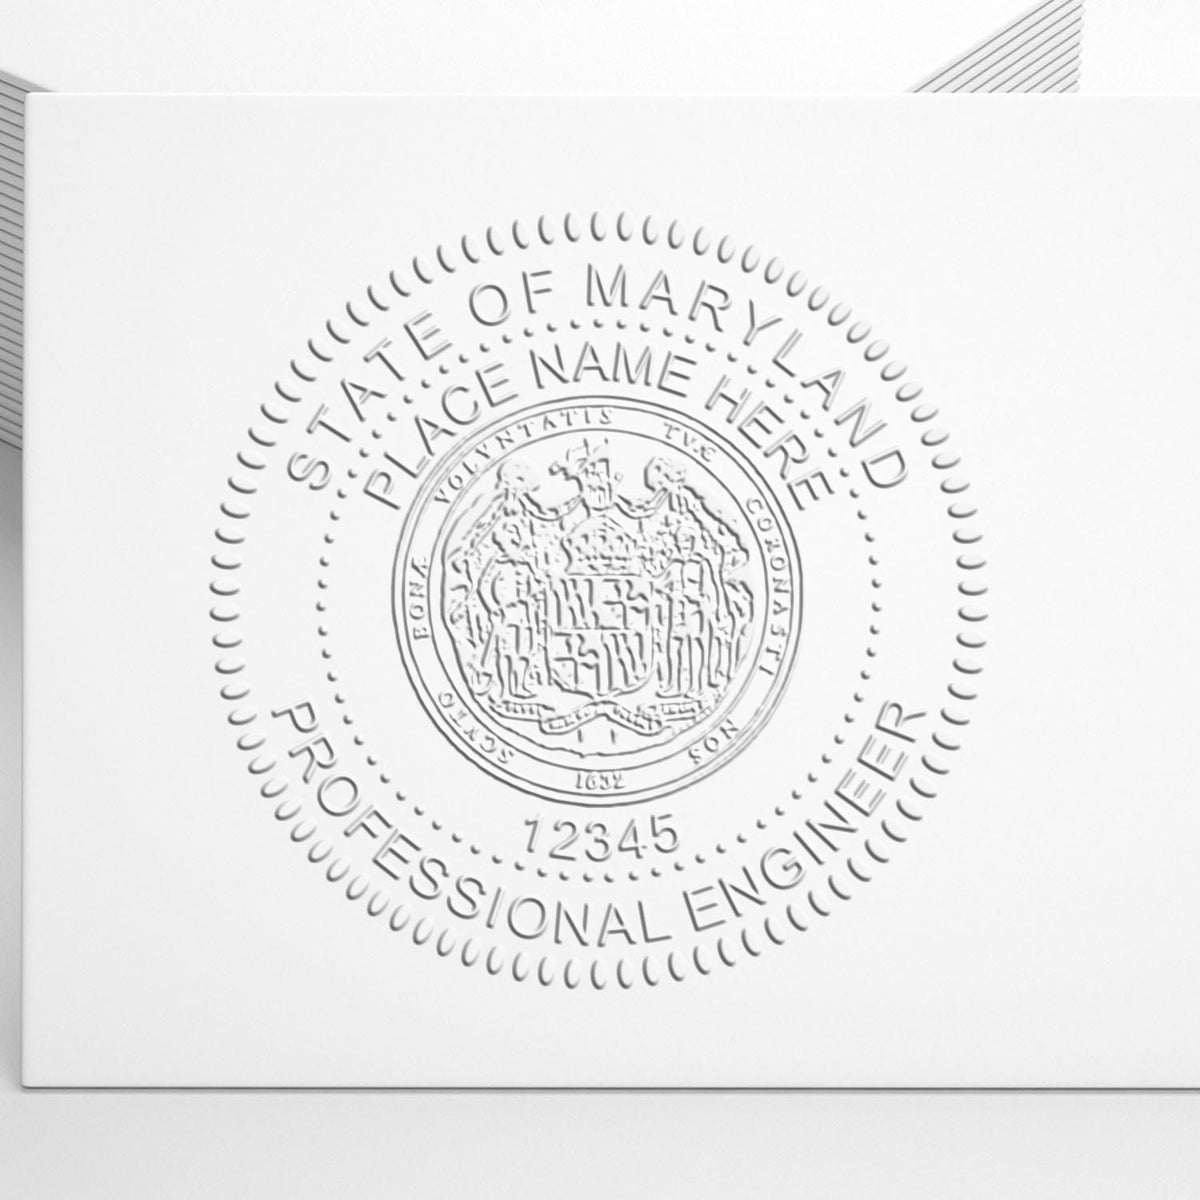 The State of Maryland Extended Long Reach Engineer Seal stamp impression comes to life with a crisp, detailed photo on paper - showcasing true professional quality.